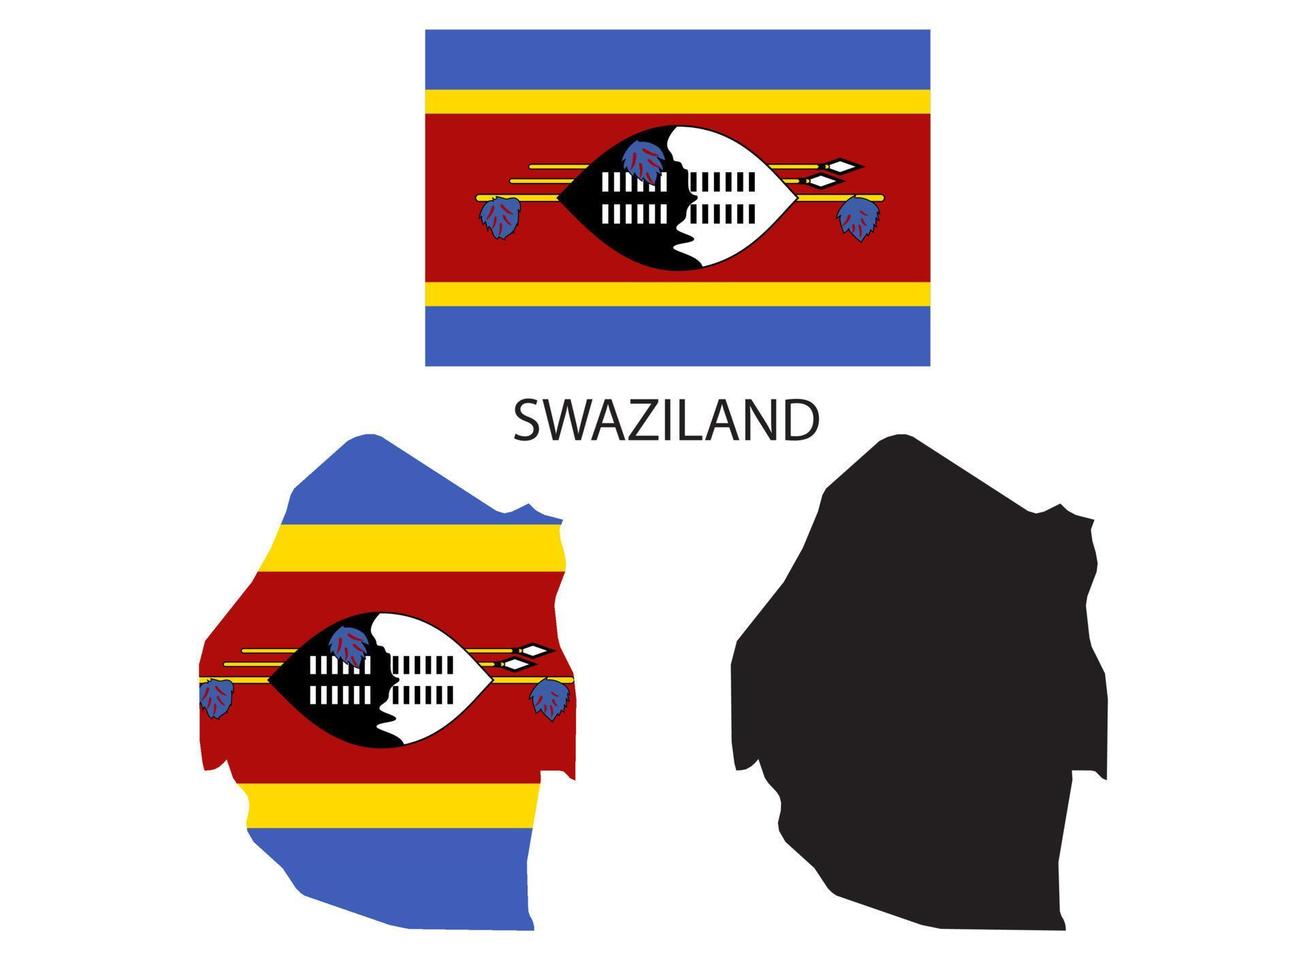 SWAZILAND flag and map illustration vector